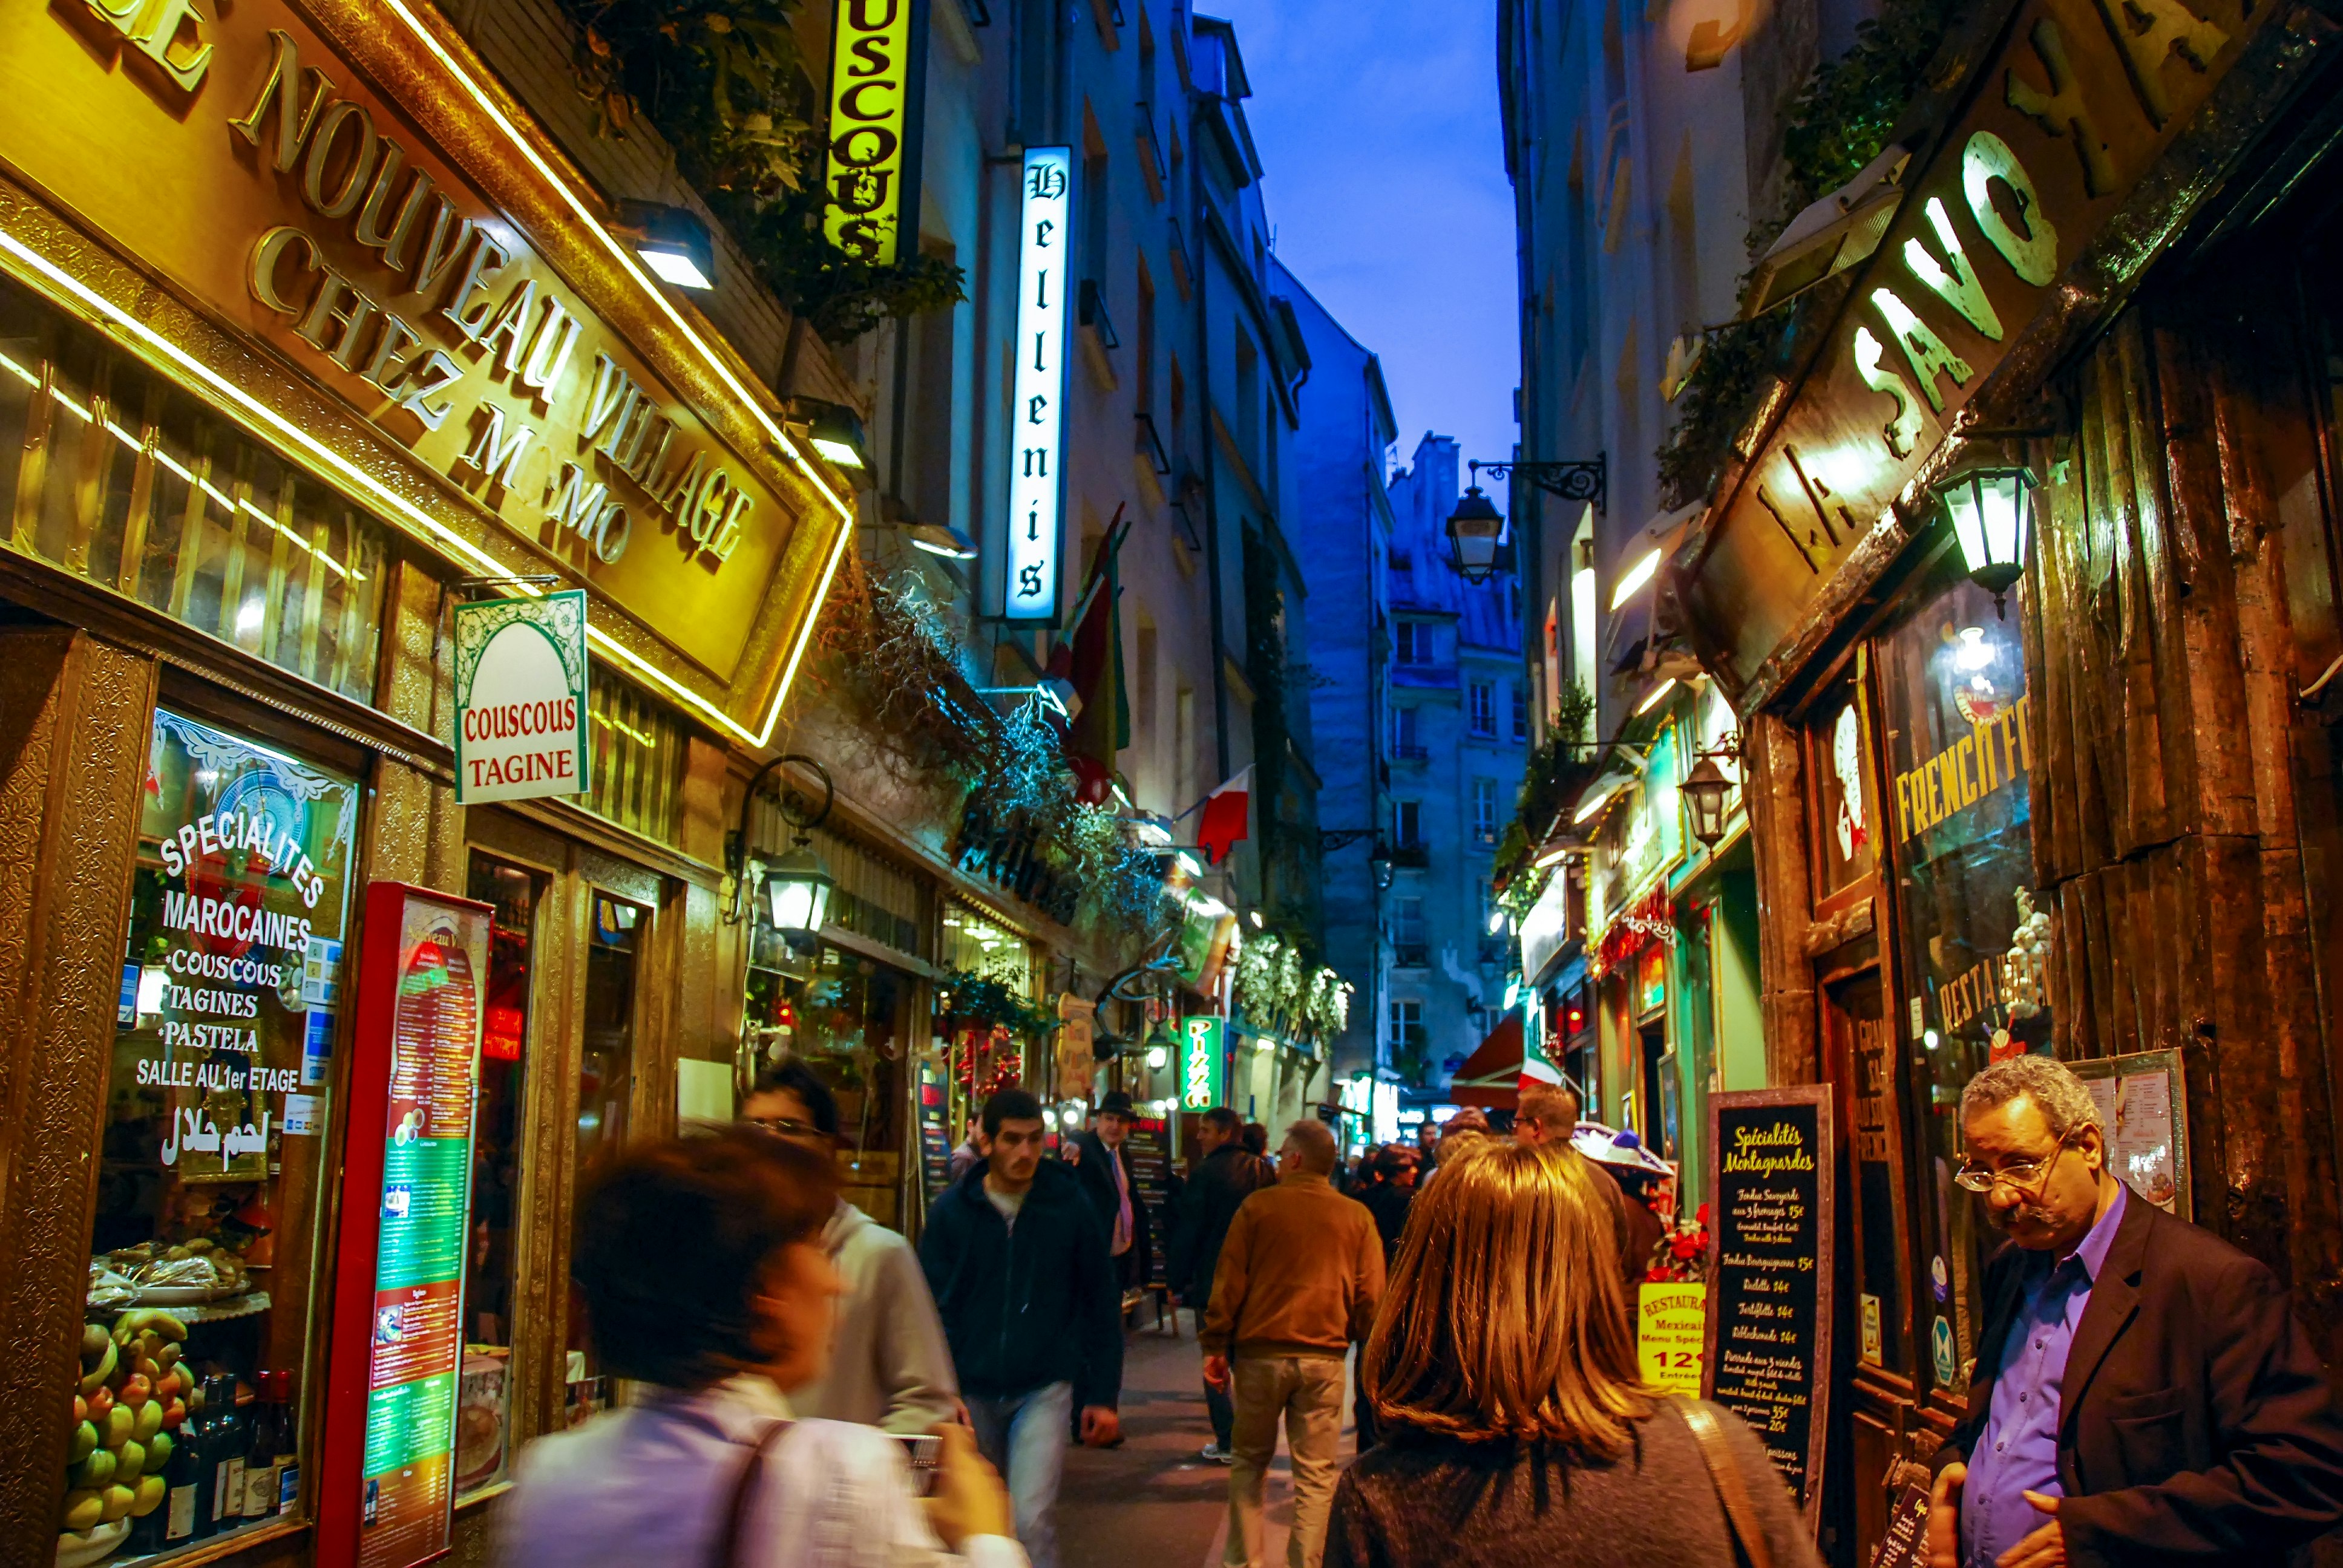 A busy street in Paris' Latin Quarter at night, with bars and restaurants lining the street all lit up